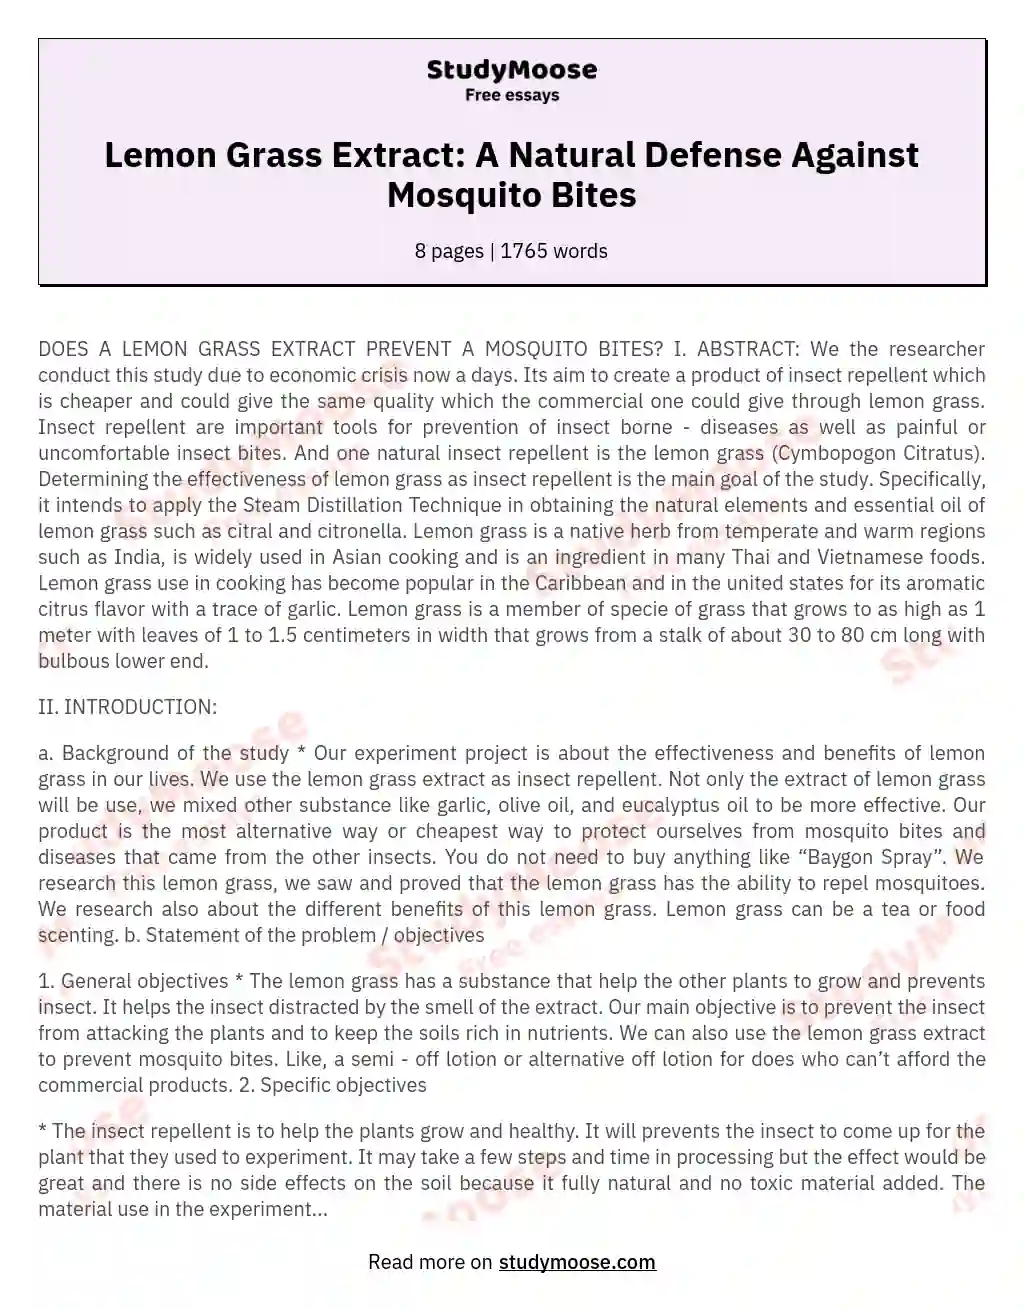 Lemon Grass Extract: A Natural Defense Against Mosquito Bites essay